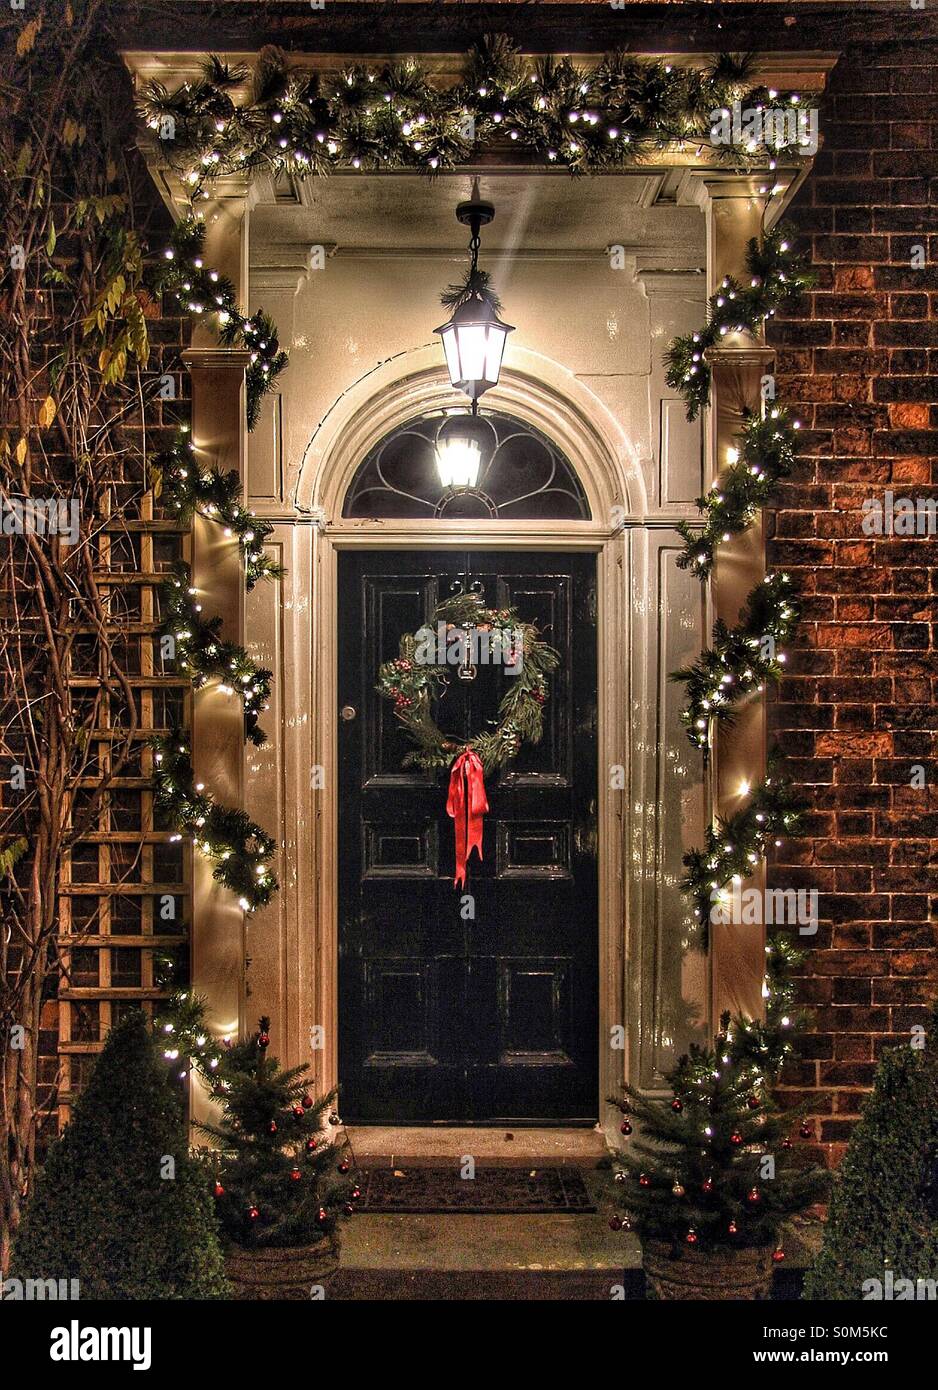 A traditional doorway decorated for Christmas with a wreath and lights. Stock Photo